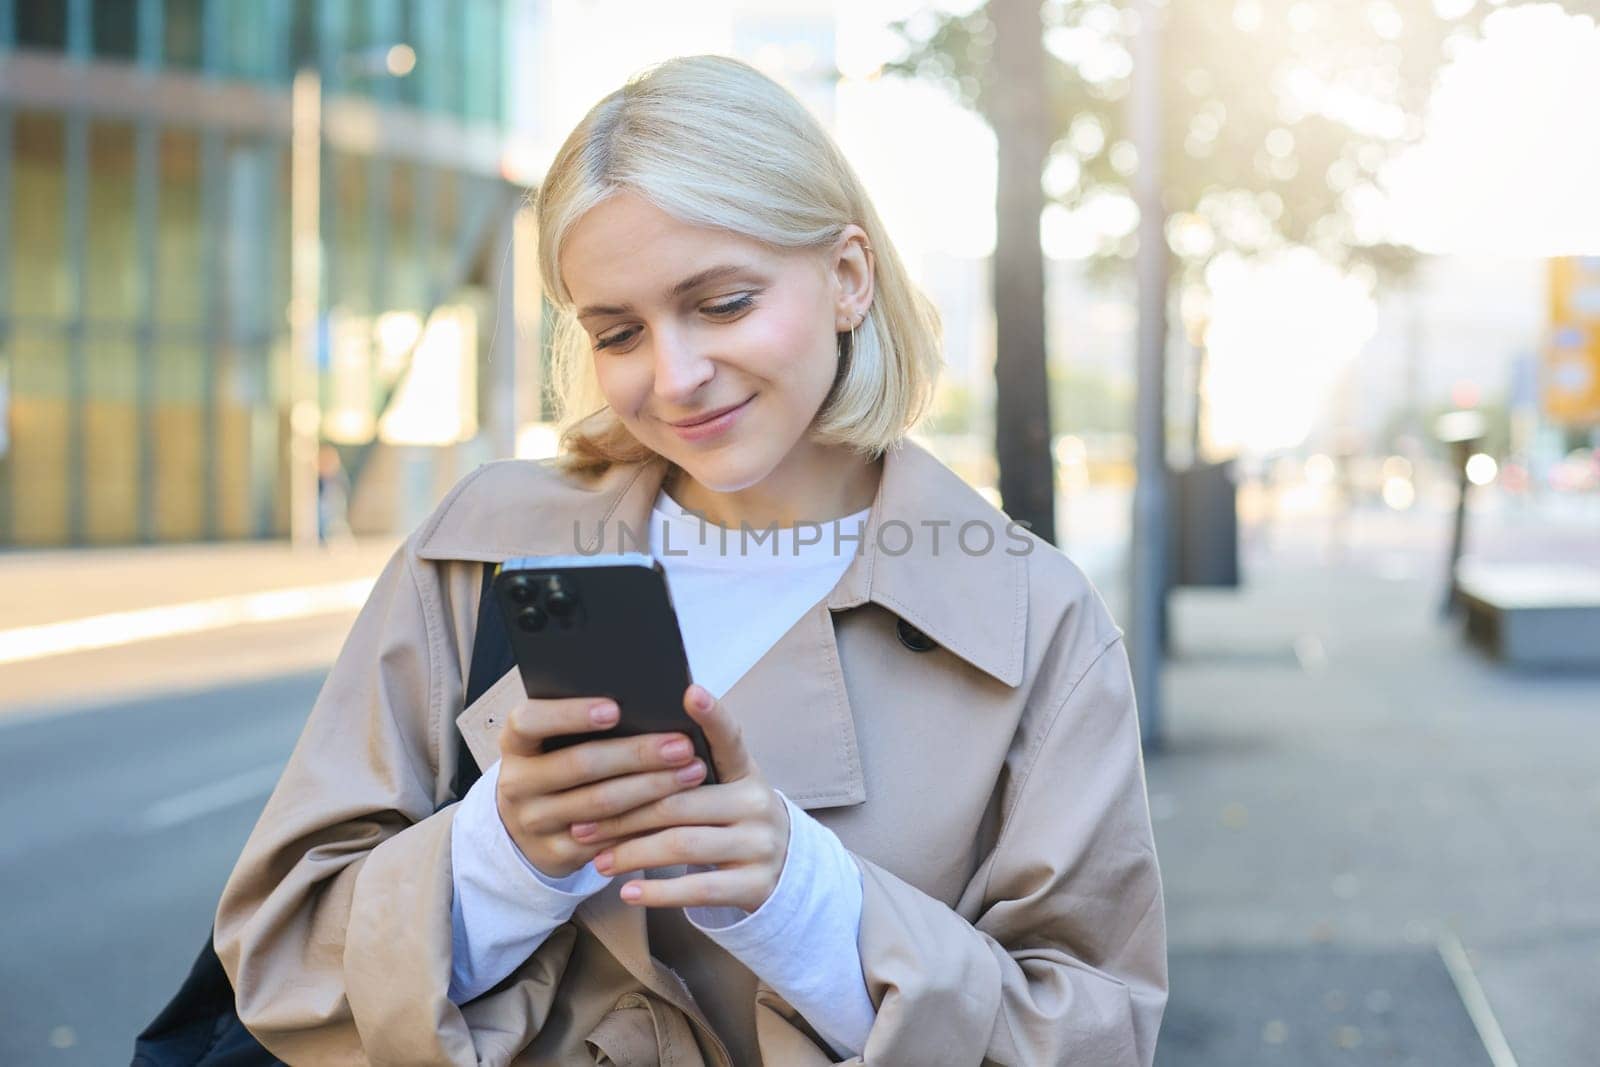 Image of young modern woman, student walking on street and looking at her mobile phone, smiling and looking happy. Copy space